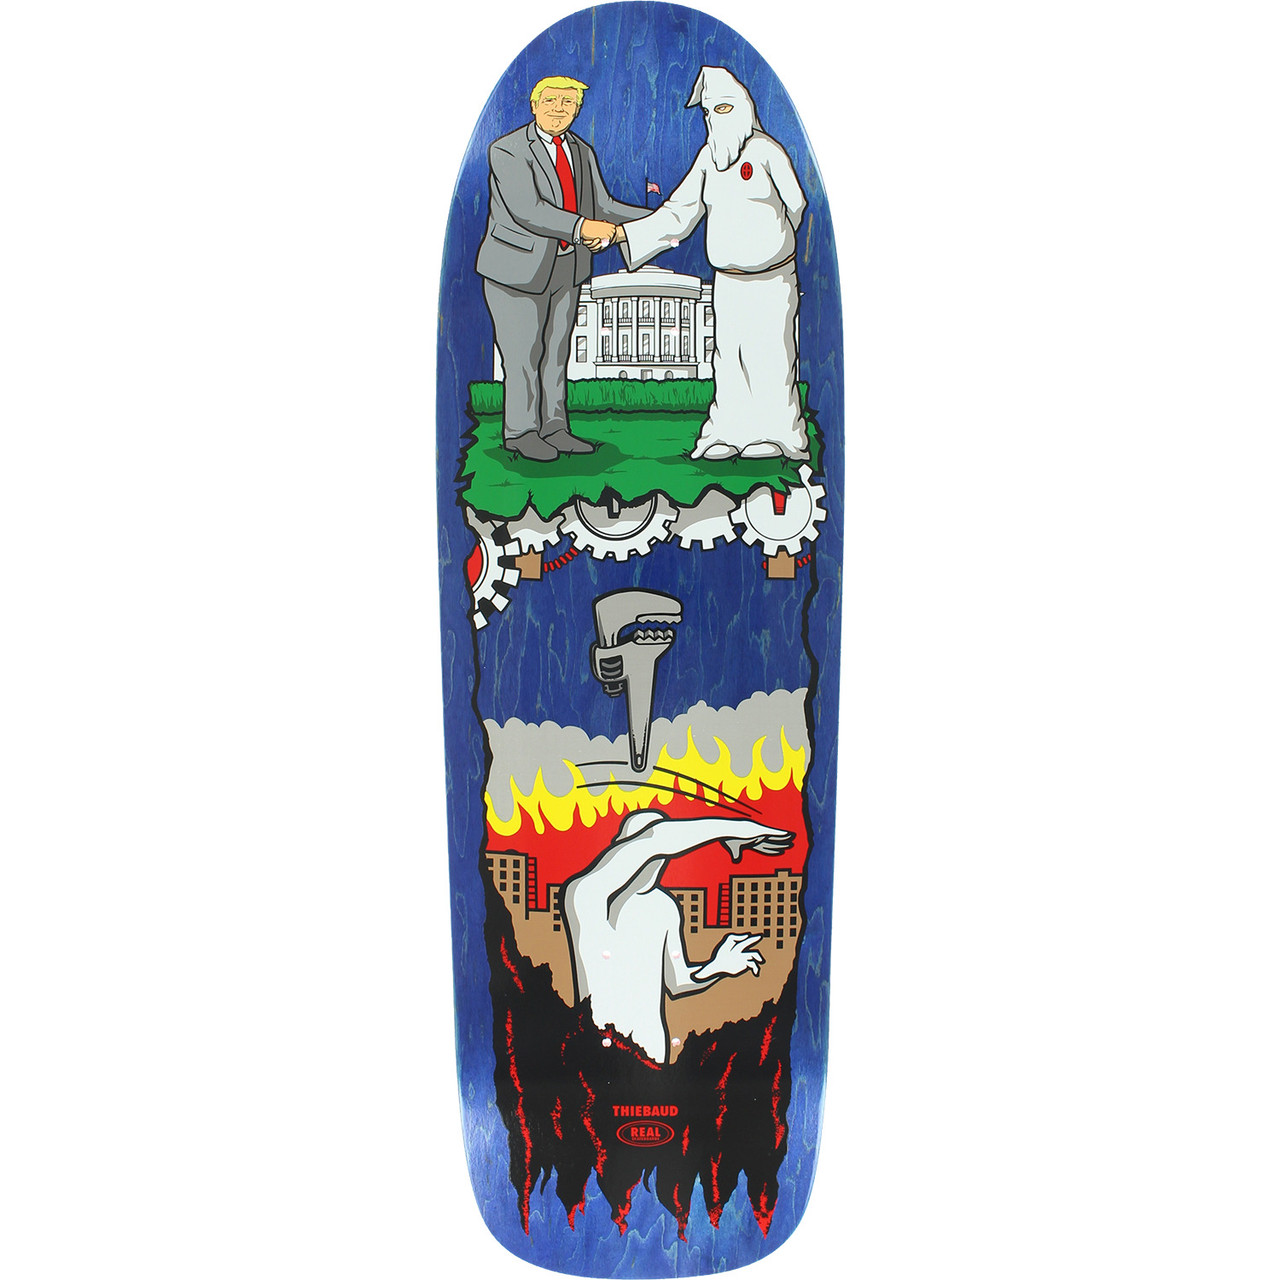 Real Thiebaud Wrench Skate Deck Assorted 9.78